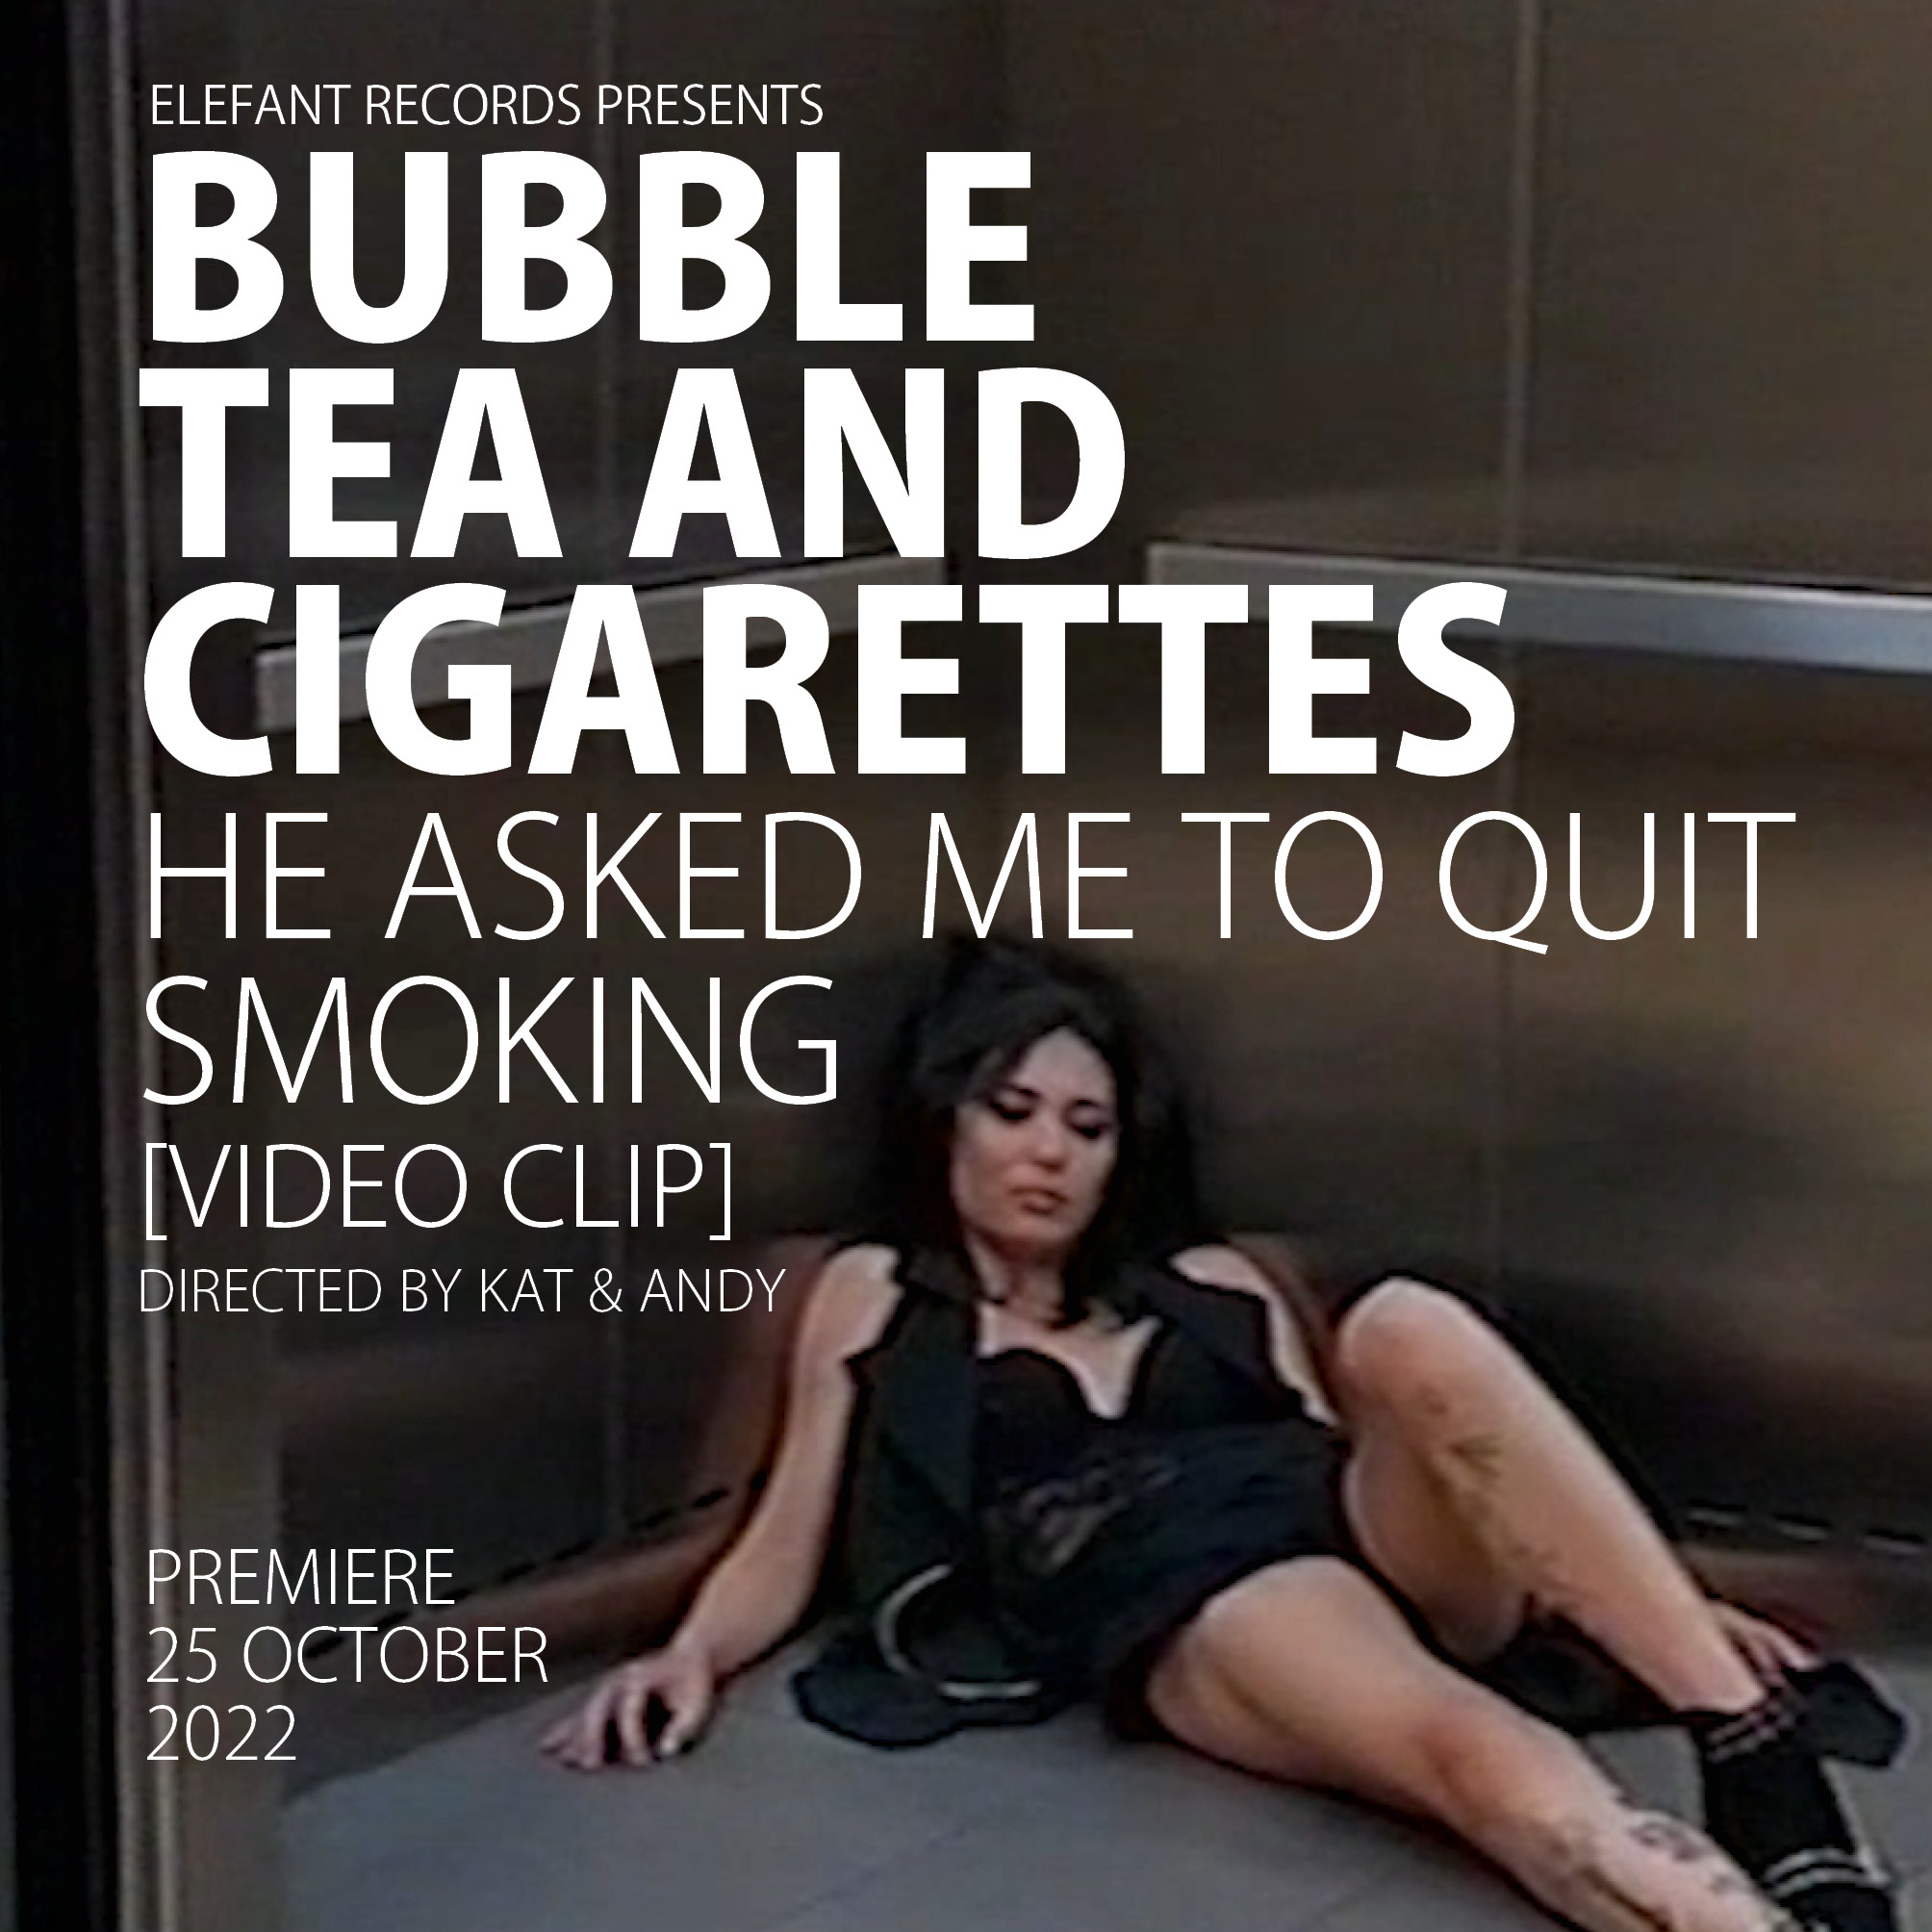 BUBBLE TEA AND CIGARETTES "He Asked Me To Quit Smoking" Video-clip